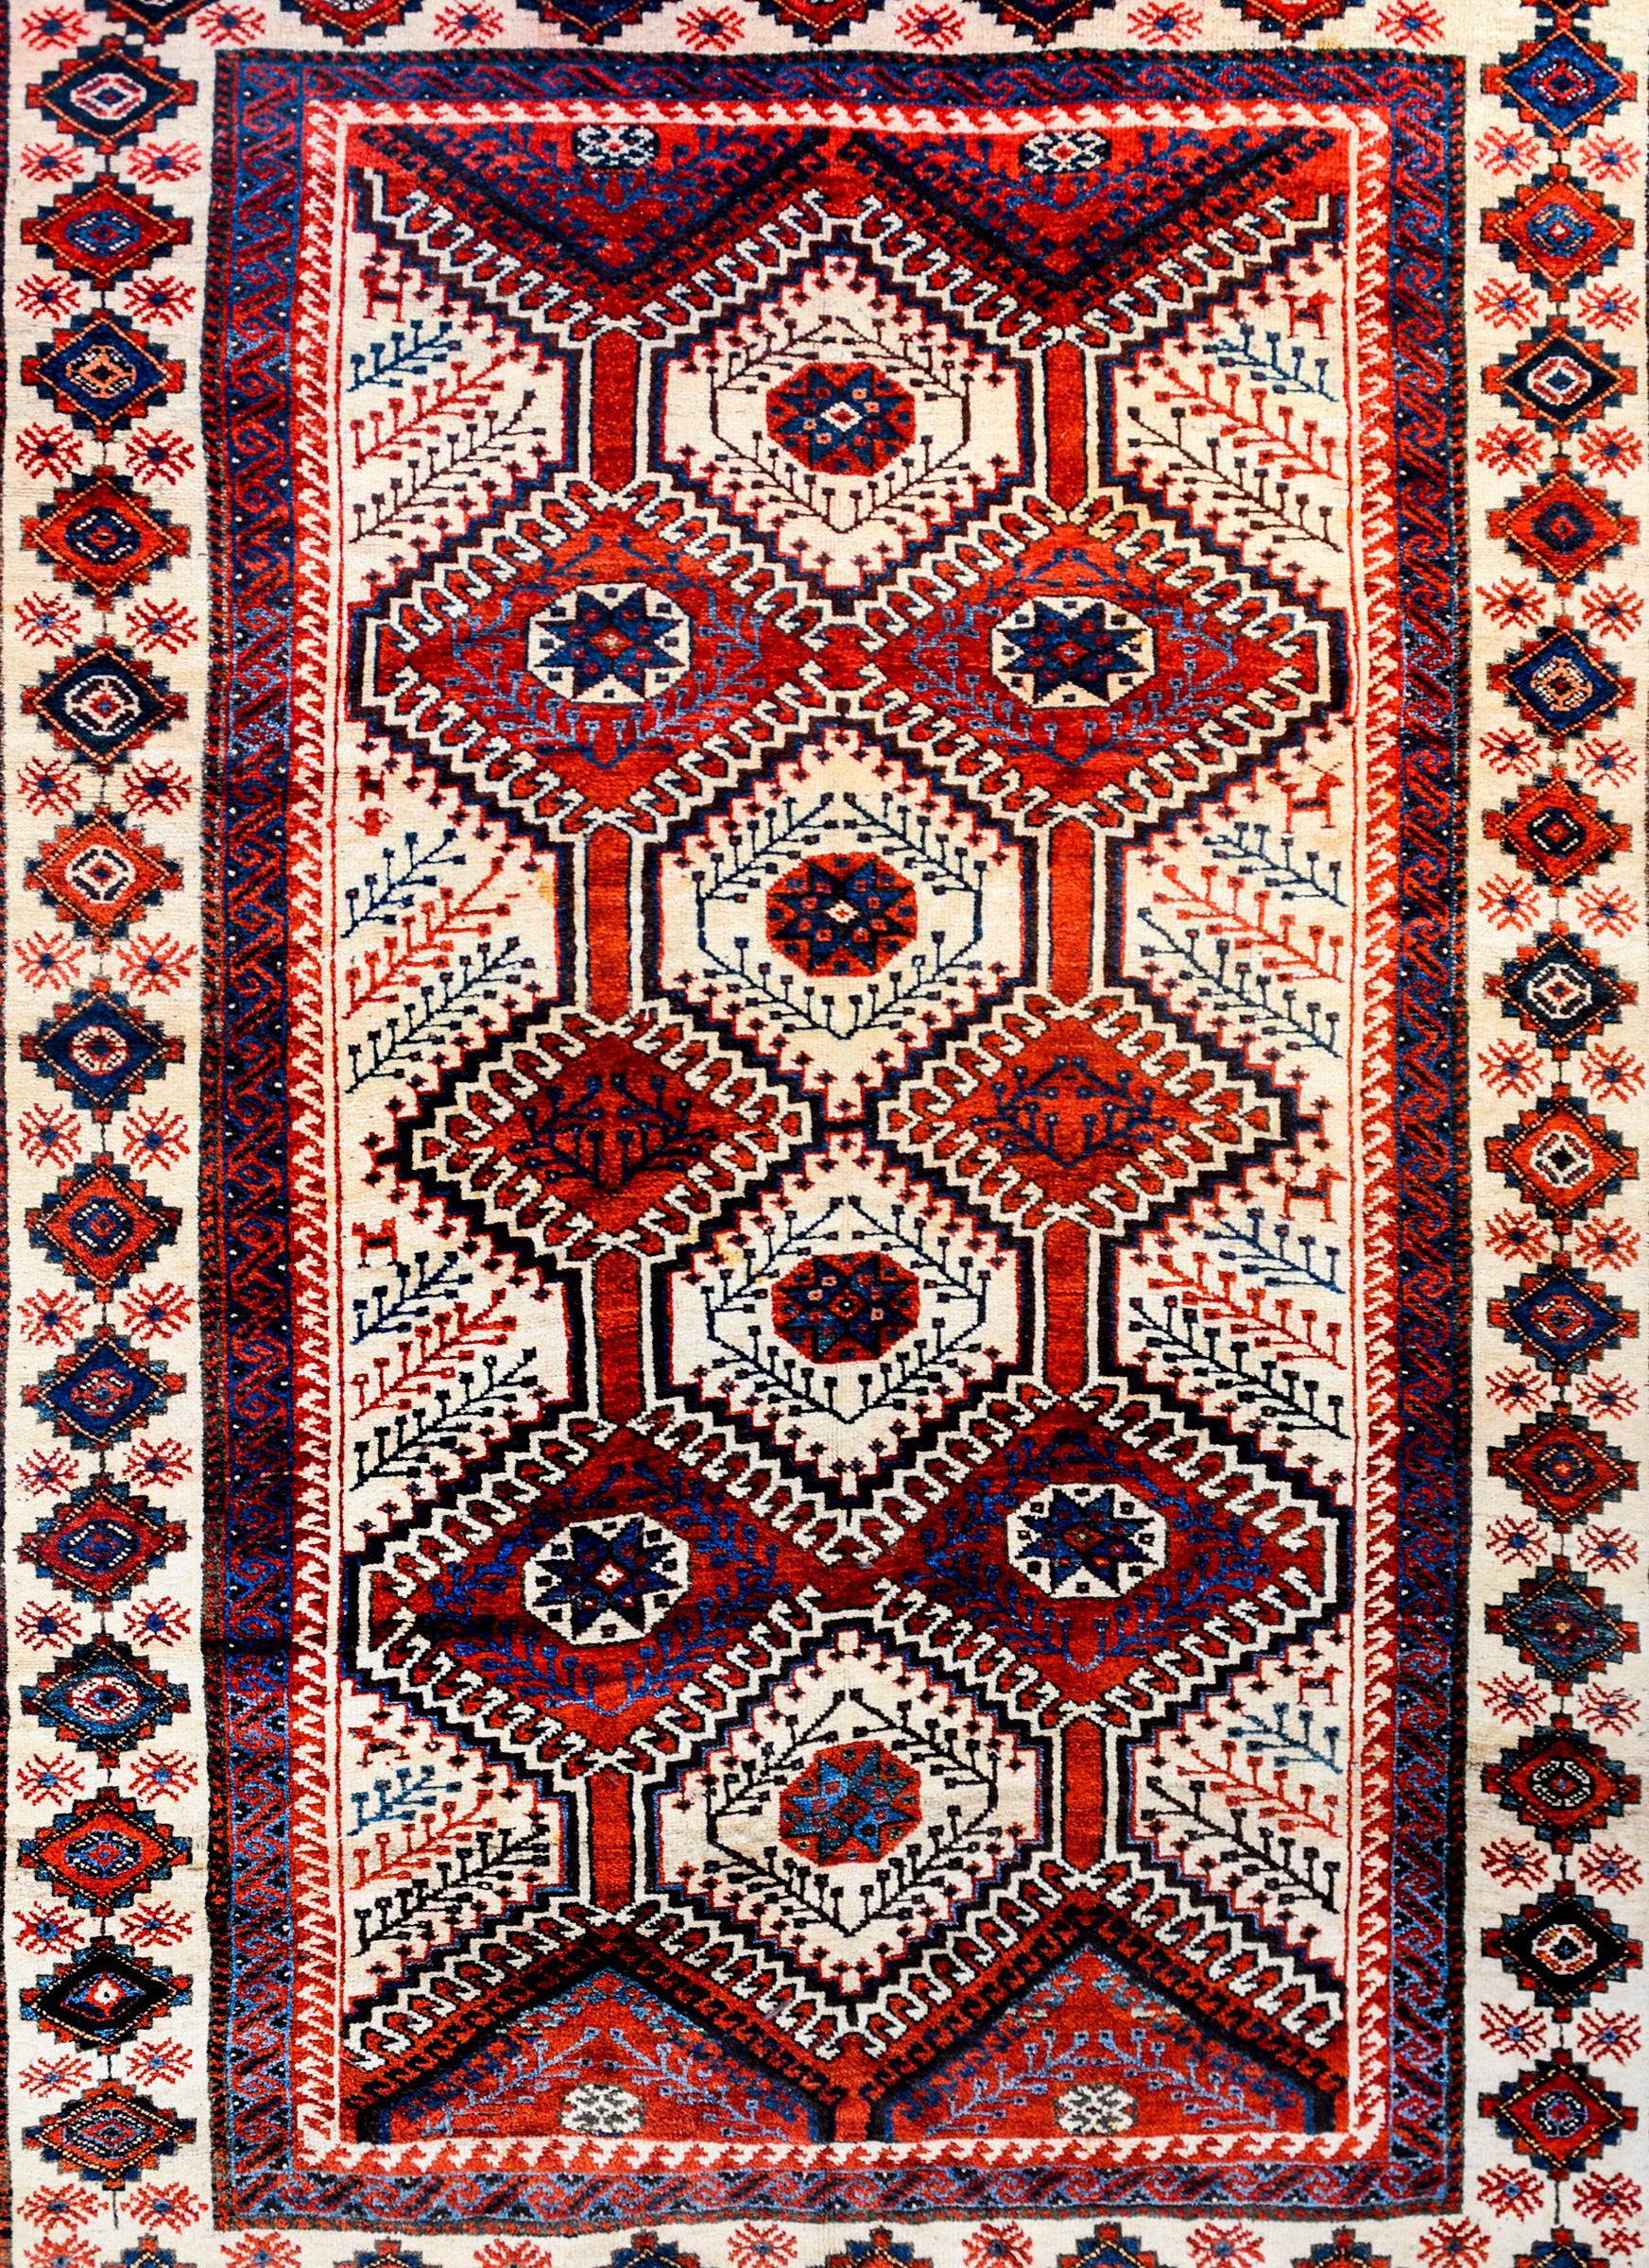 A wonderful vintage Persian Lori rug with a bold tribal pattern containing multiple diamond patterned medallions amidst a crimson and indigo field, all with a stylized petite patterned vine and leaf pattern. The border is exceptional with a wide